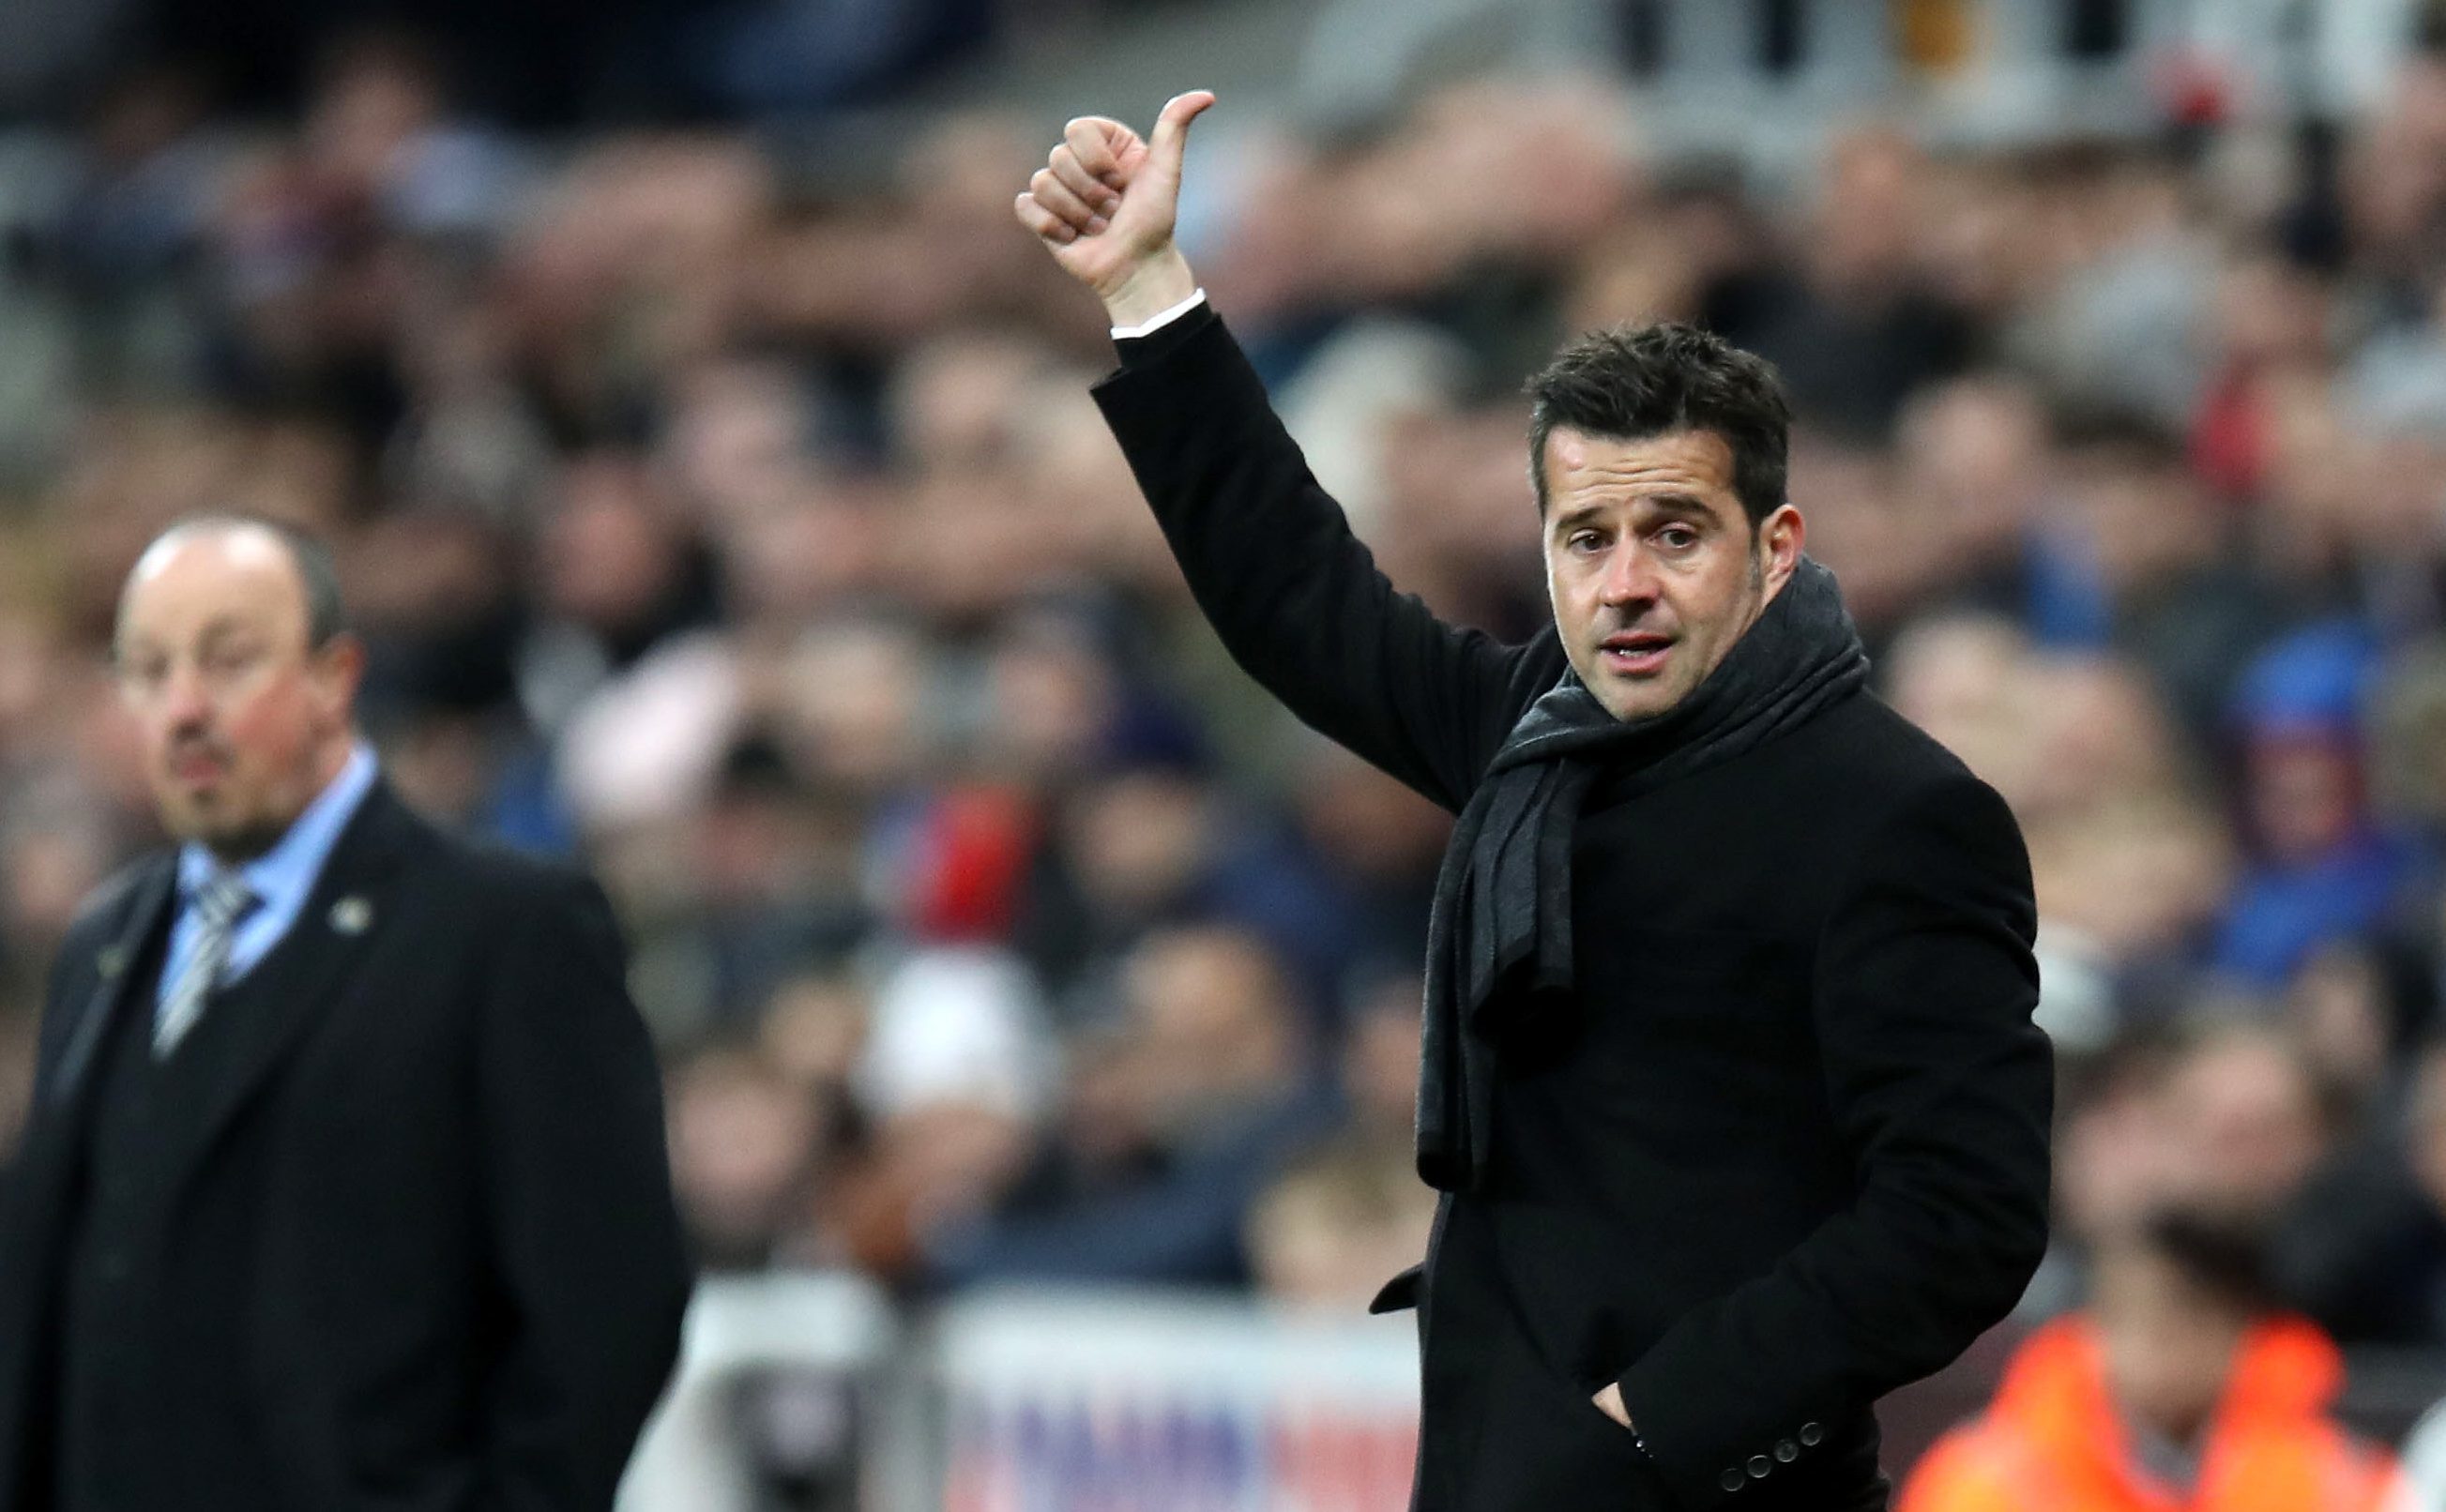 Watford boss Marco Silva on the touchline (Steve Welsh/Getty Images)